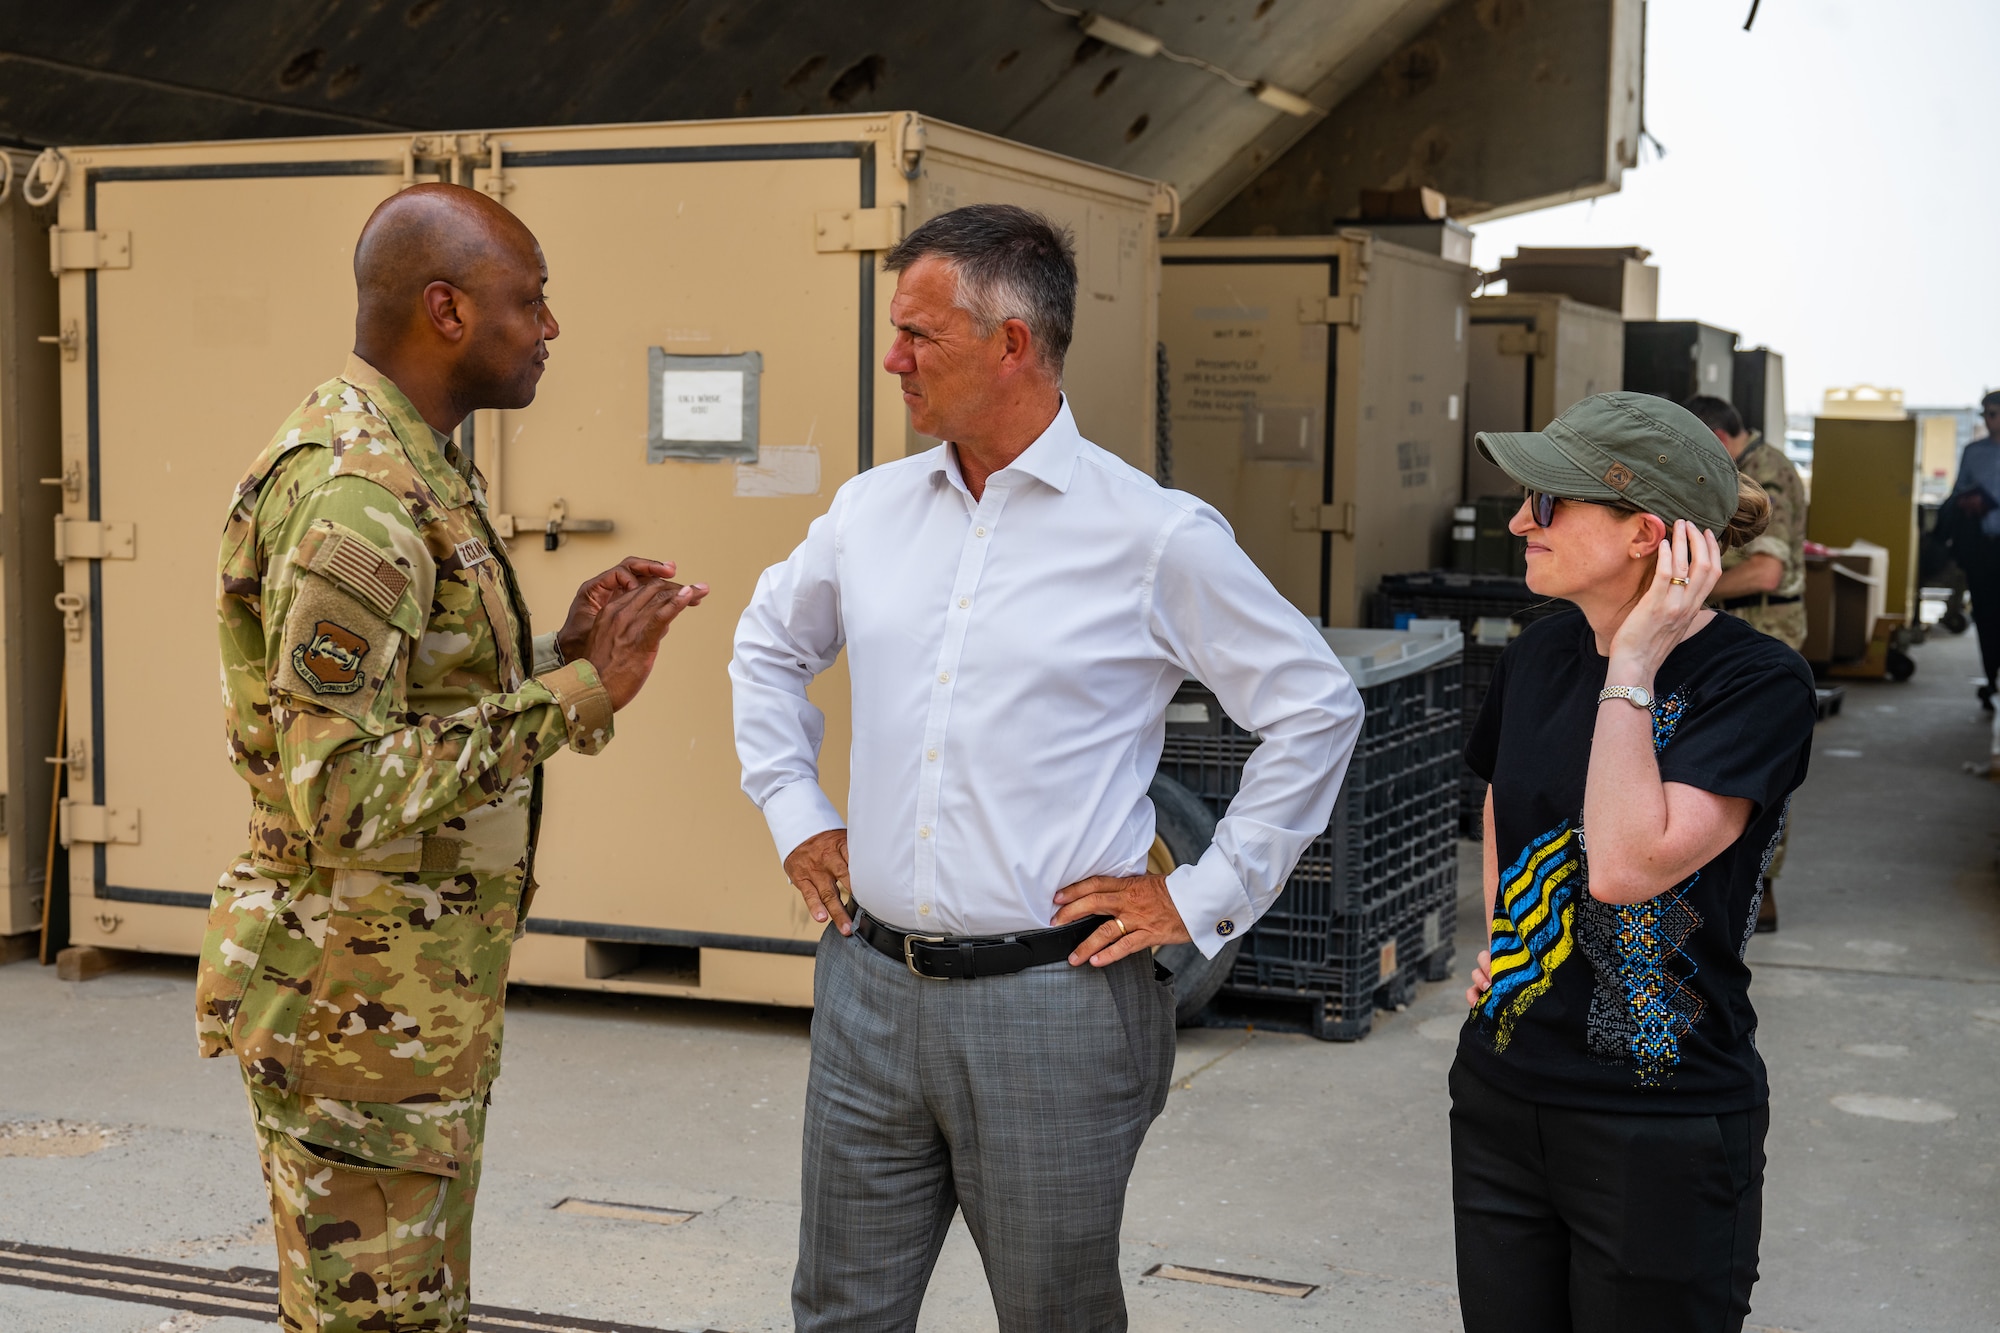 From left, U.S. Air Force Col. Damion Holtzclaw, 386th Air Expeditionary Wing deputy commander, Lord Mark Lancaster, United Kingdom Government’s Defence Export Advocate, and Ambassador Belinda Lewis, British Ambassador to Kuwait, share a conversation during a tour at Ali Al Salem Air Base, Kuwait, July 4, 2023. A group of U.K. leaders traveled to Kuwait to foster the working relationship between the U.K. and their Kuwaiti partners, and the visit also provided the opportunity for the U.S. to further the connection with our coalition partners on a strategic level. (U.S. Air Force photo by Staff Sgt. Kevin Long)